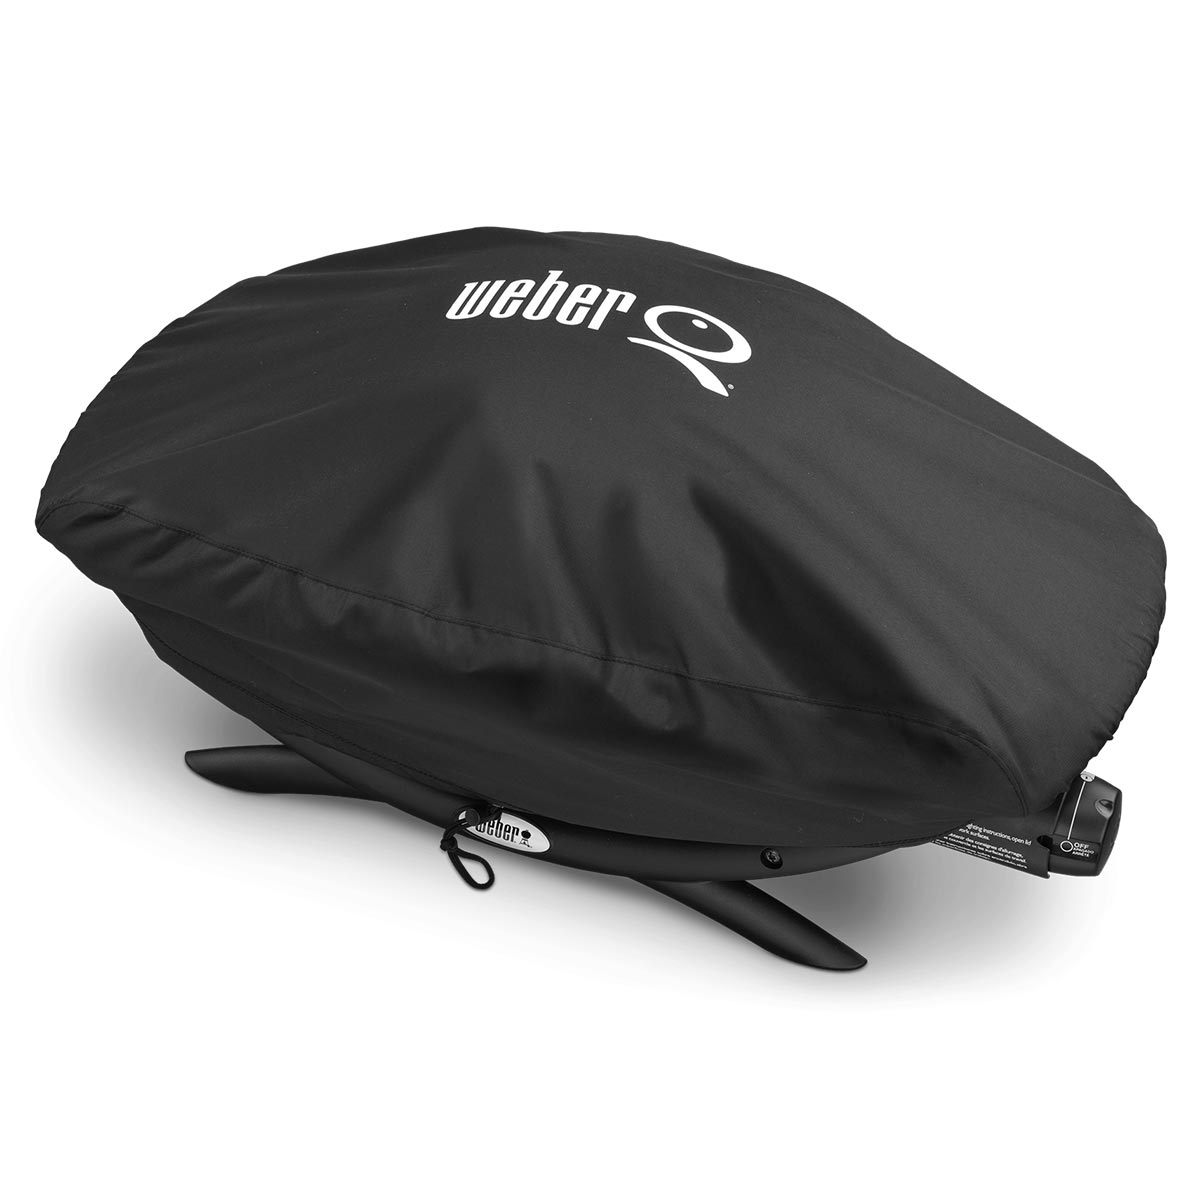 Weber Grill Cover for Q 200-2000 Series Gas Grills 7111